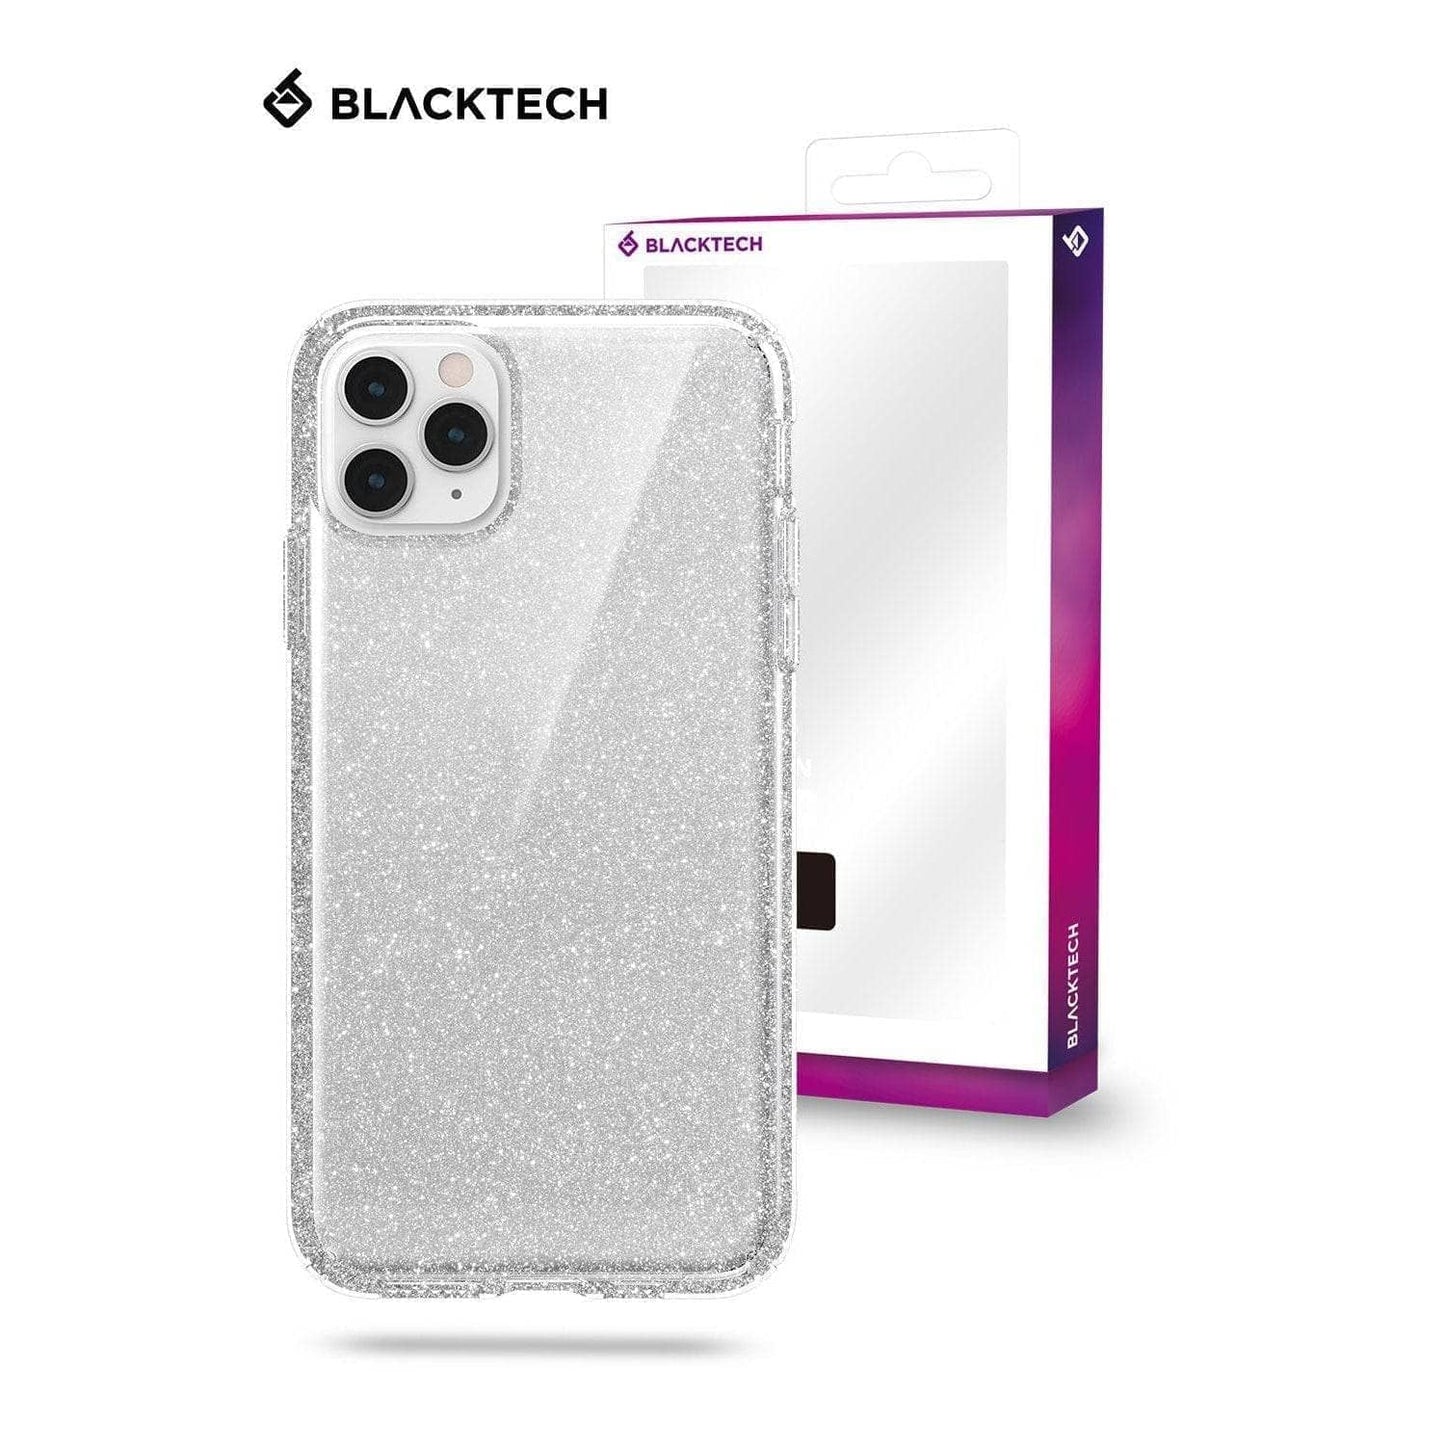 BLACKTECH Stay Glitter Case for iPhone 13 Pro max mini 6.1 6.7 5.4-Phone Case-BLACKTECH-www.PhoneGuy.com.au